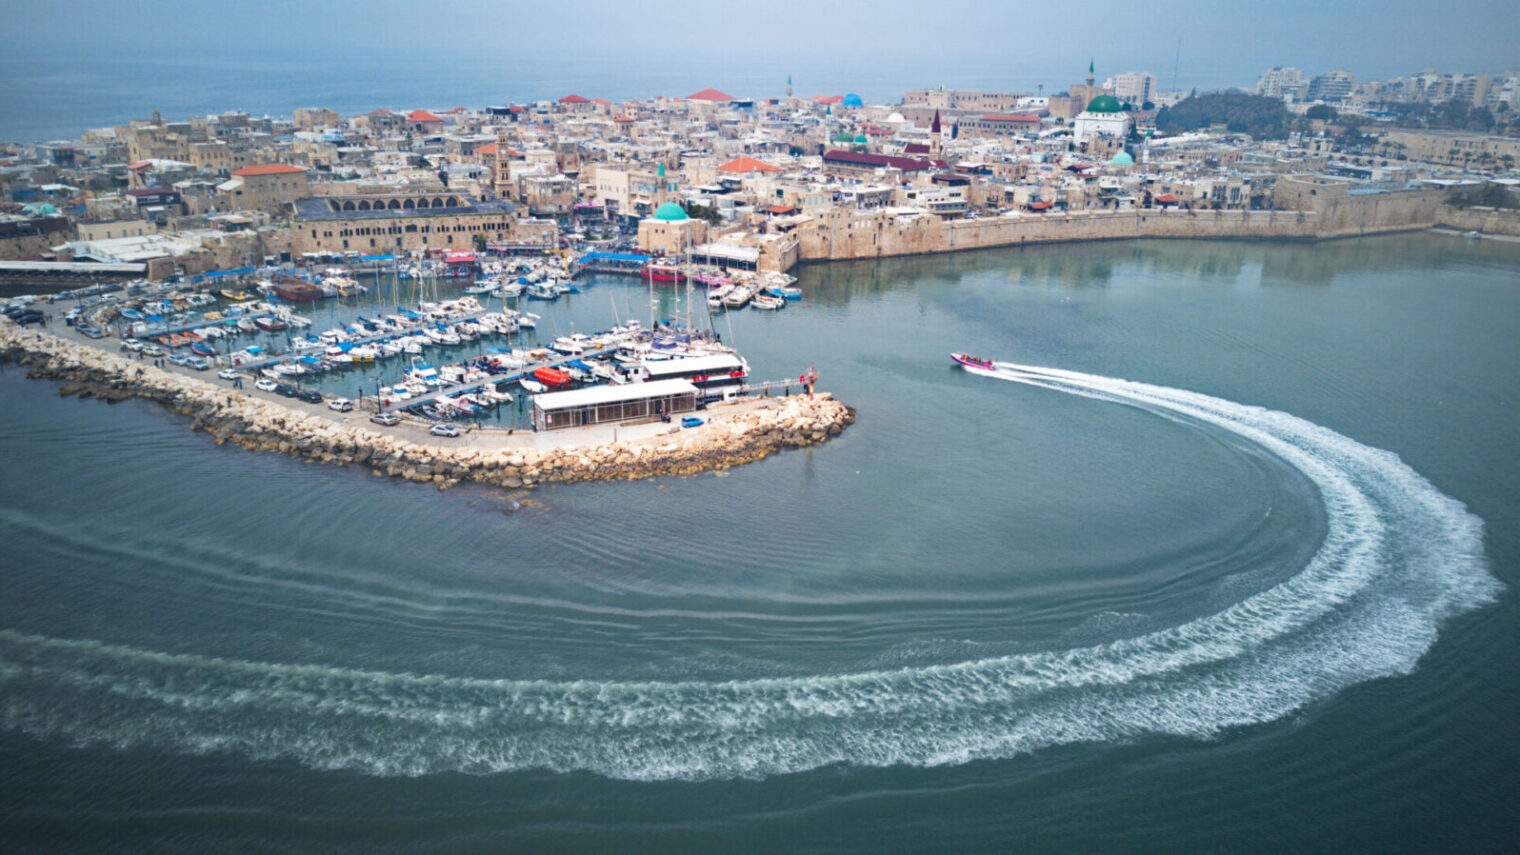 An aerial view of the Old City of Akko. Photo by Menachem Lederman/Flash90